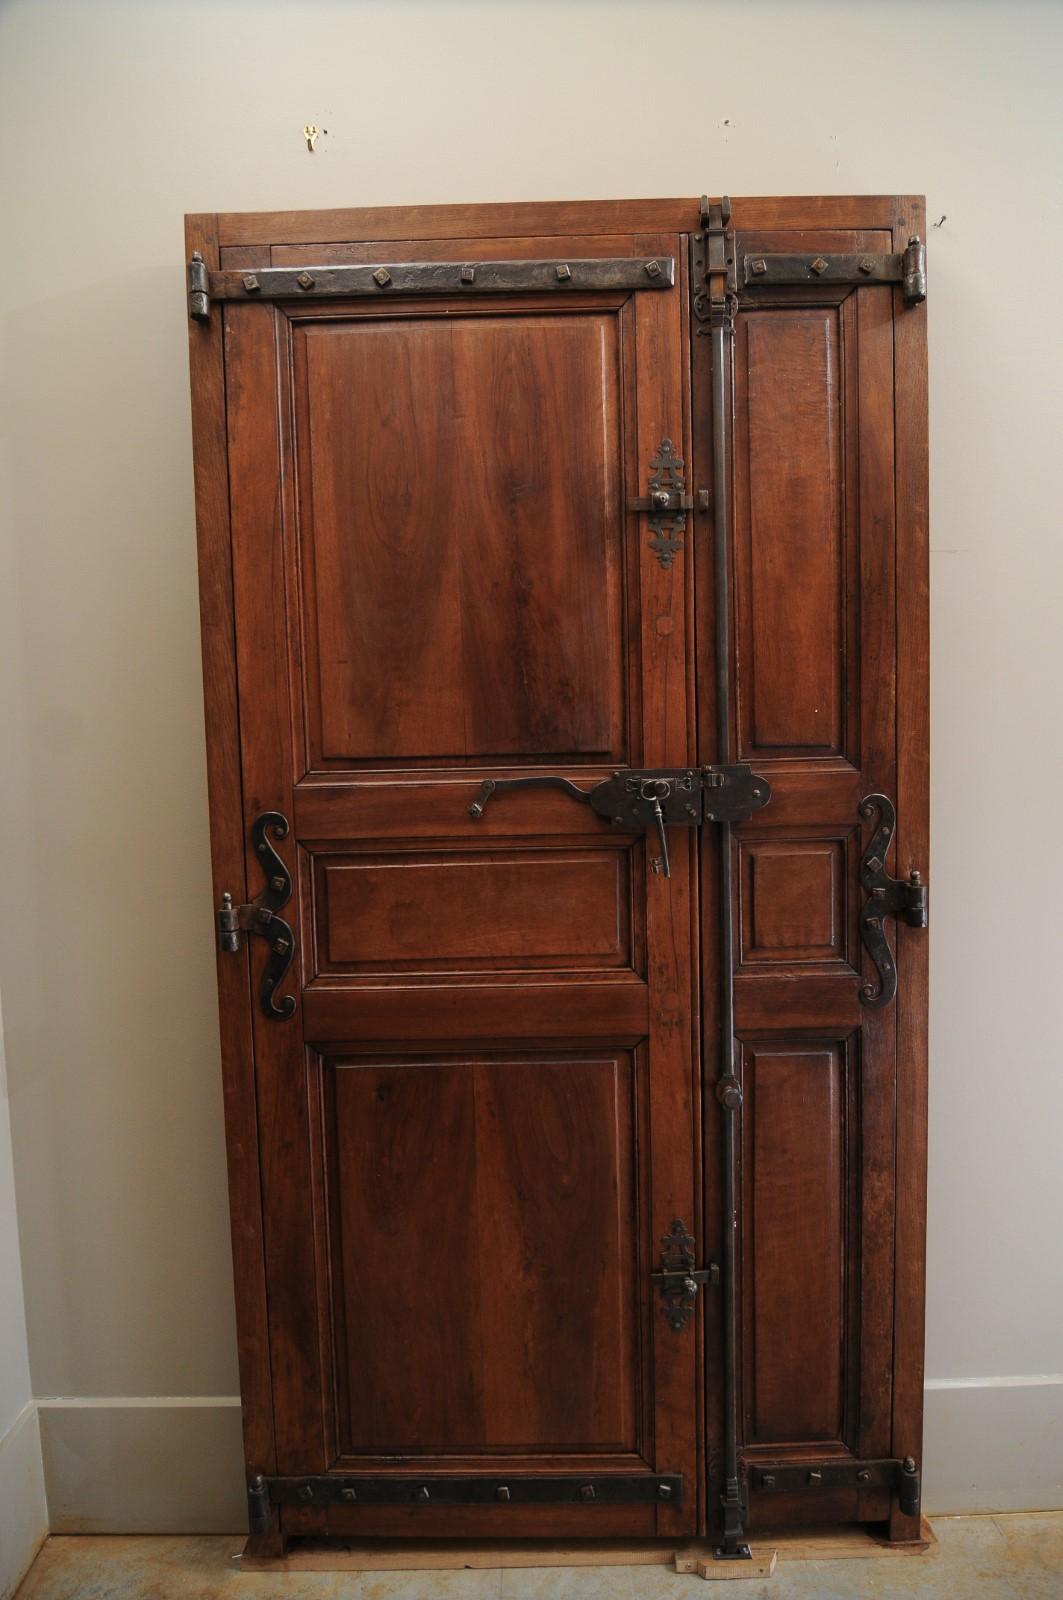 A pair of French wooden communication doors from the 19th century, with raised panels and iron hardware. Created in France during the 19th century, this pair of communication doors features a perfectly organized arrangement of panels adorned with